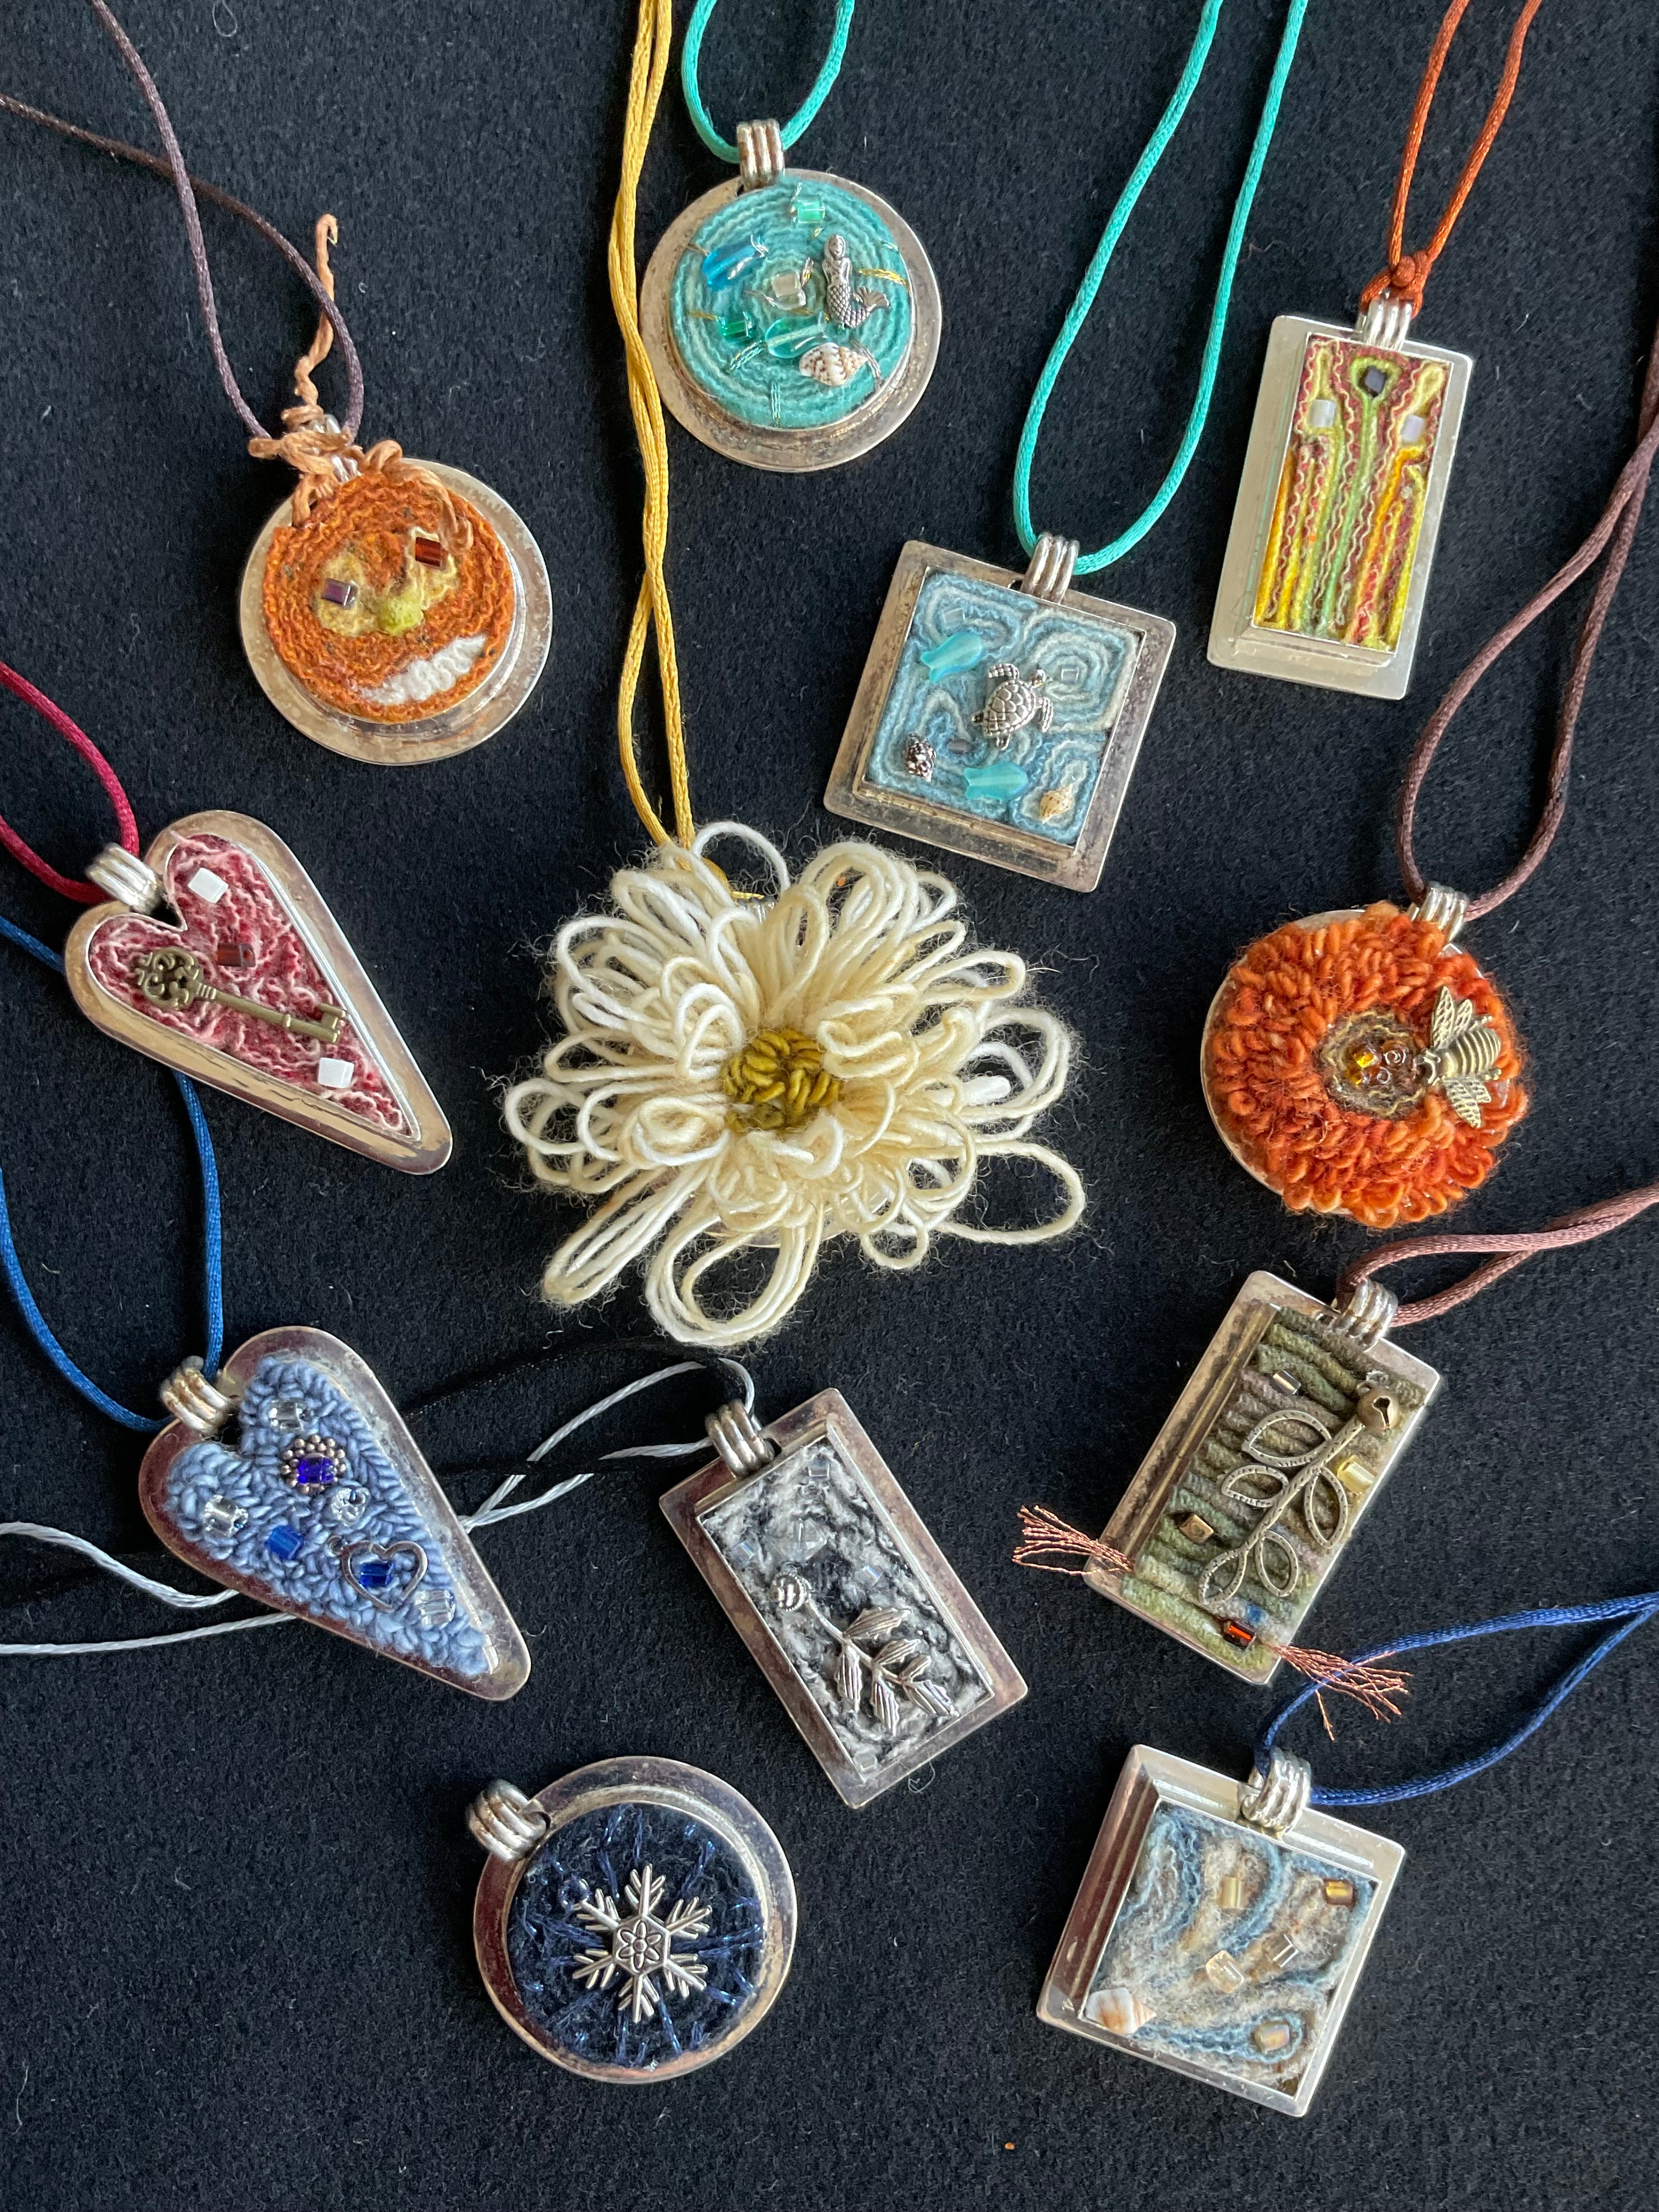 Let’s talk about Fiber Jewelry